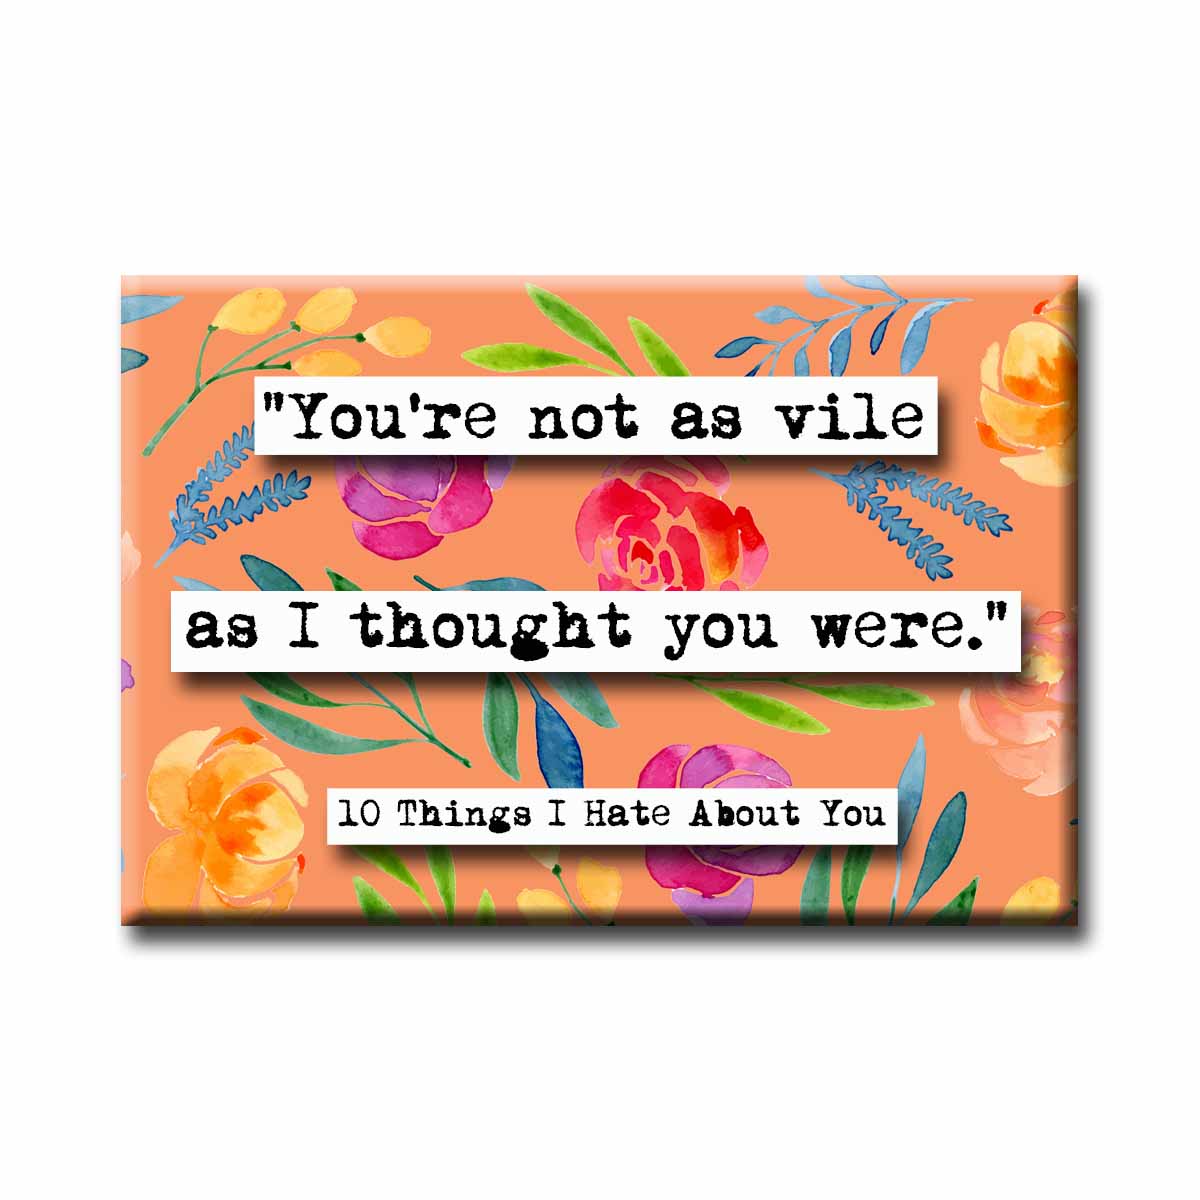 10 Things I Hate About You Vile Quote Refrigerator Magnet